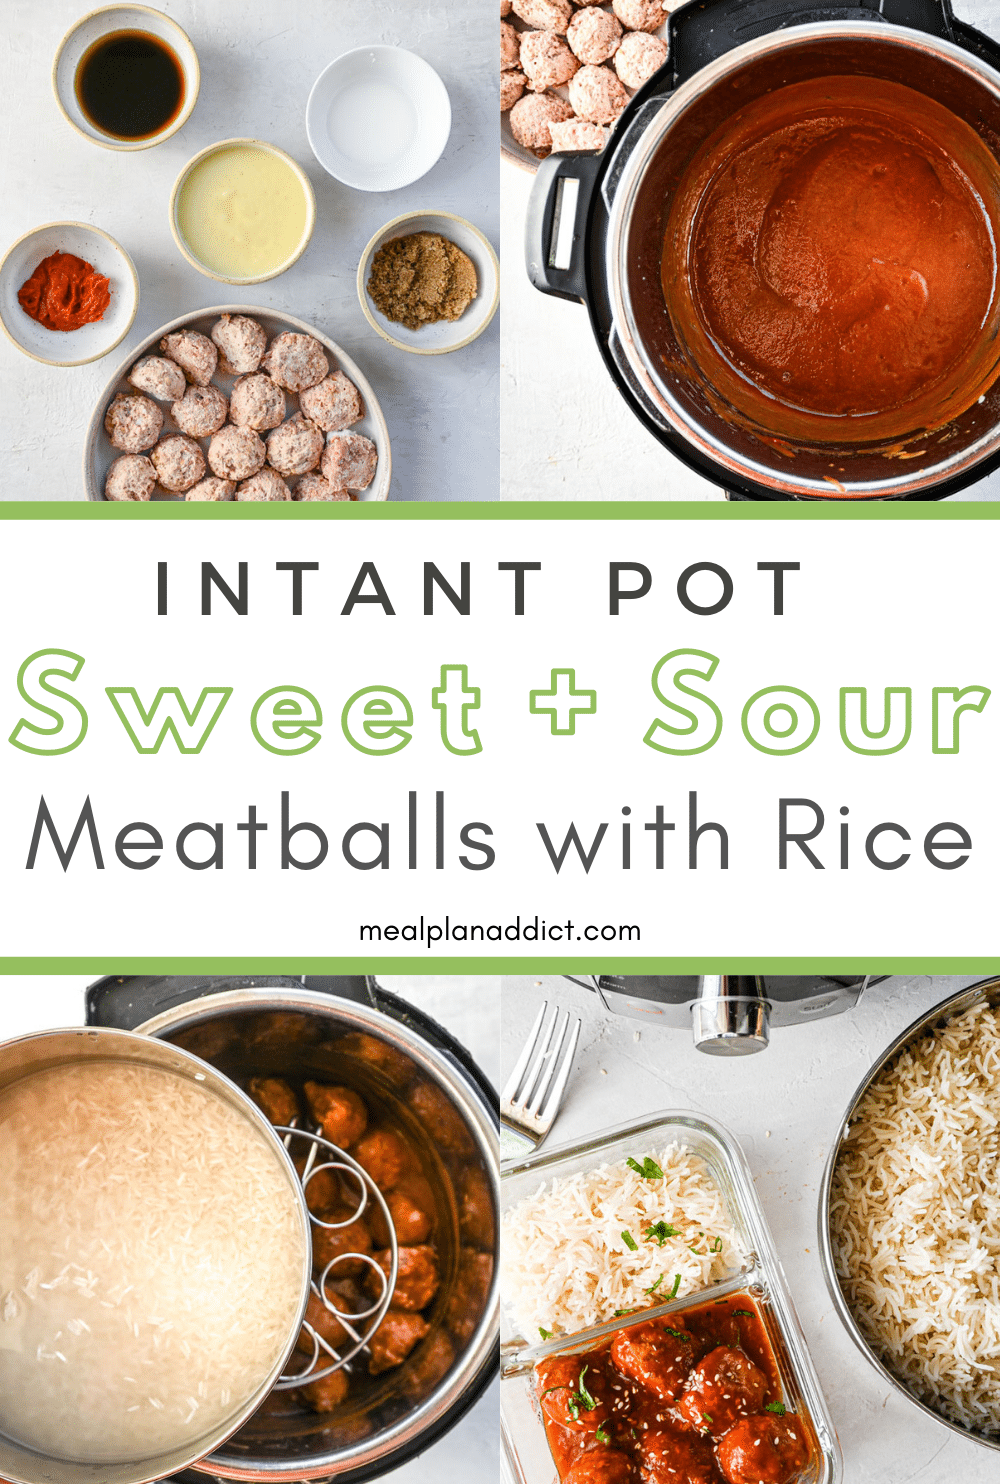 Meatballs with rice pin for Pinterest